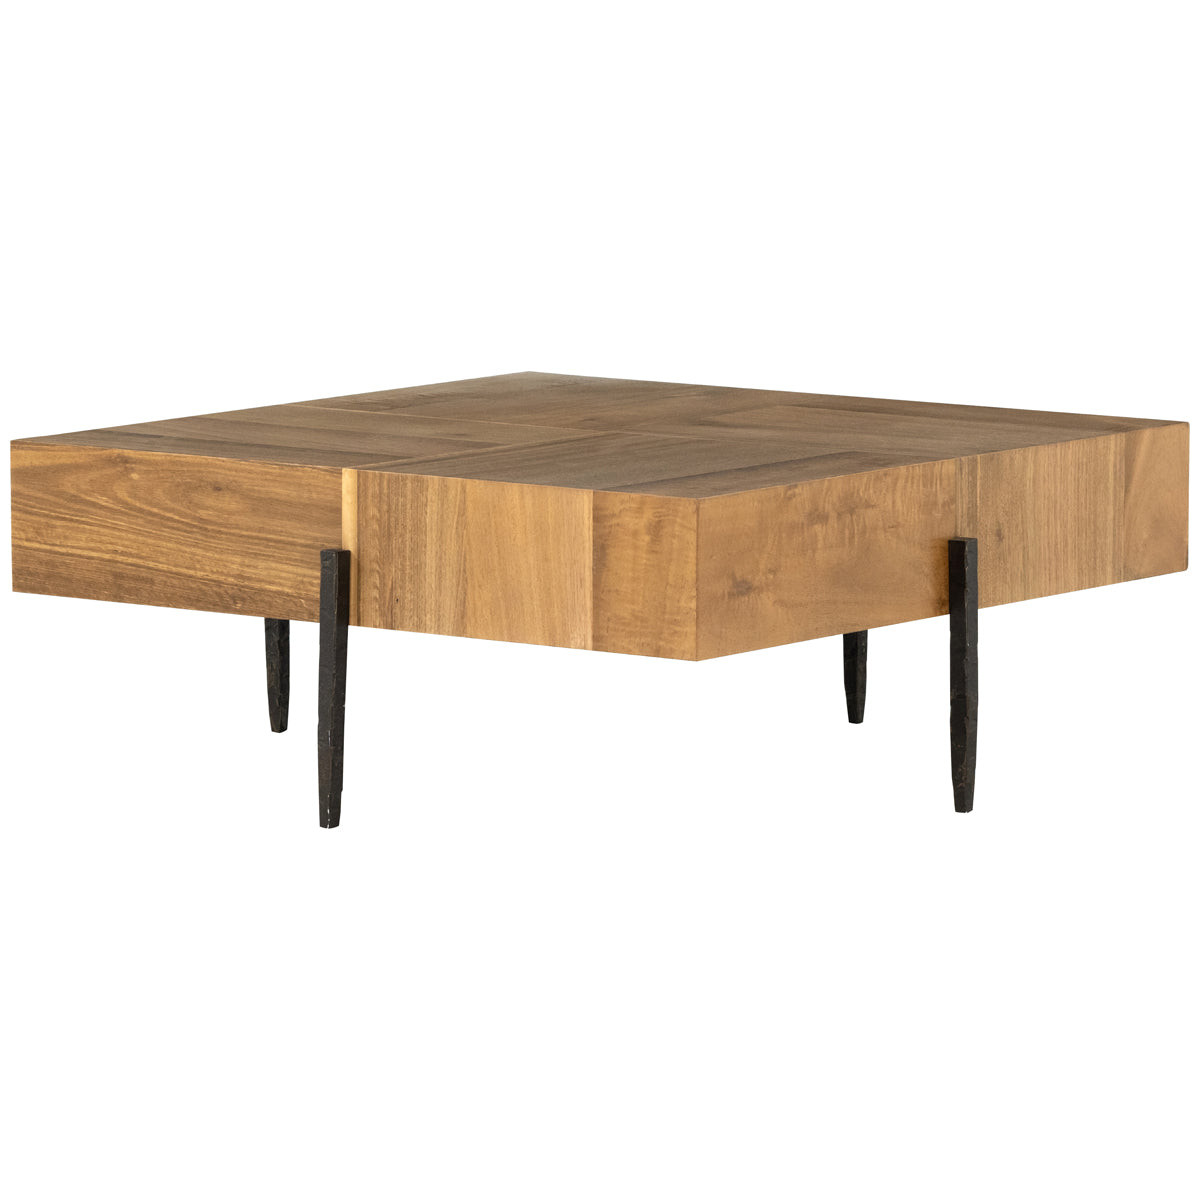 Four Hands Wesson Indra Square Coffee Table - Natural Yukas